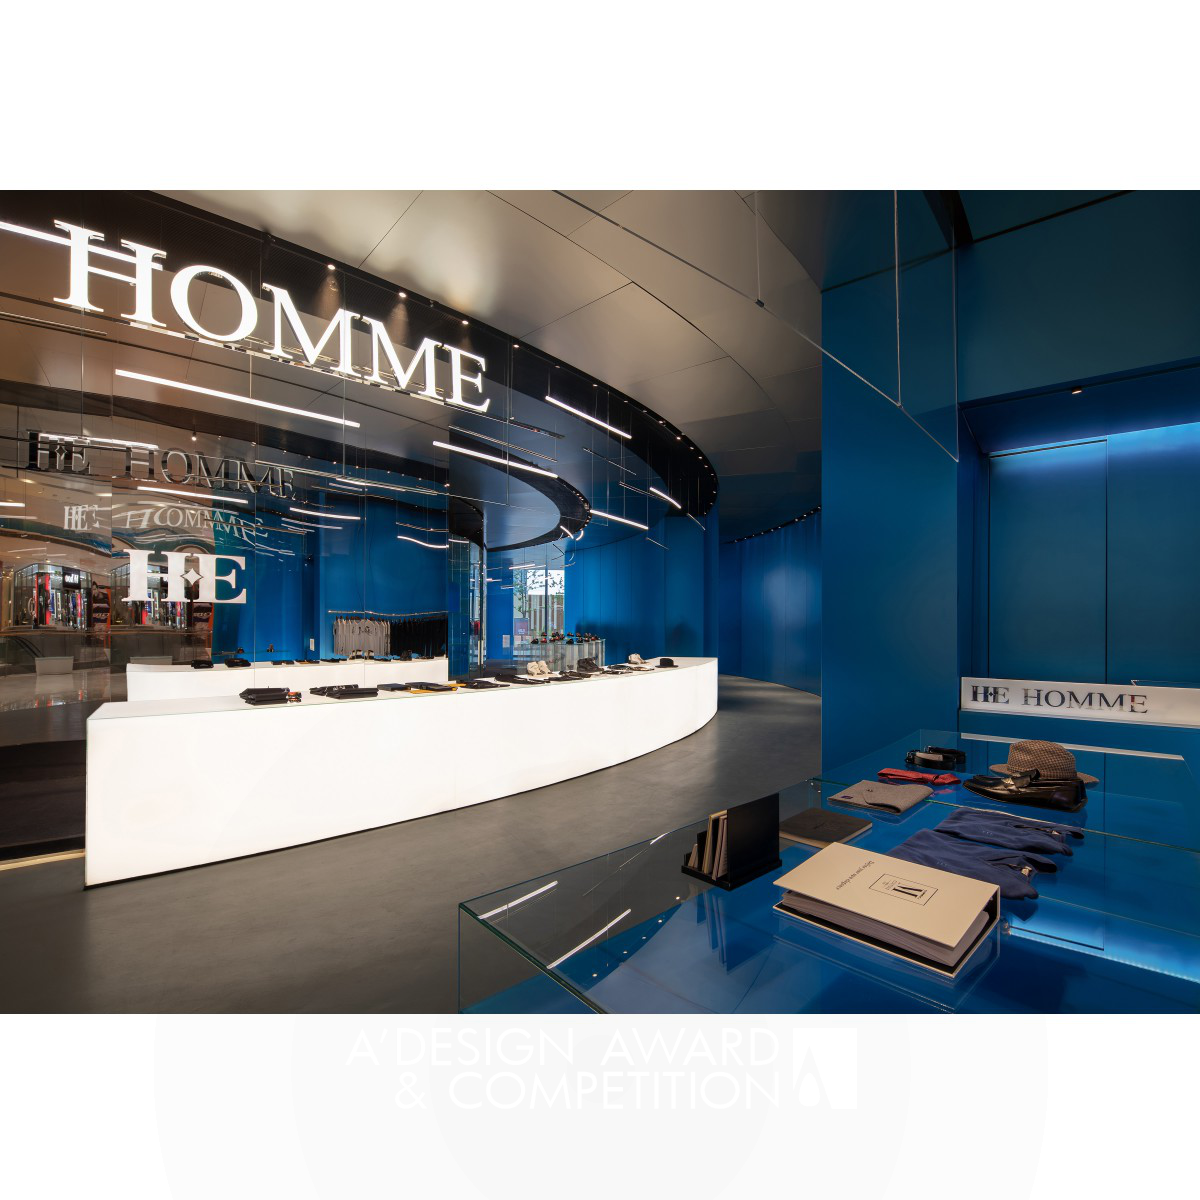 He Homme High-End Couture Men’s High-end Tailor Interior by Kingson Leung